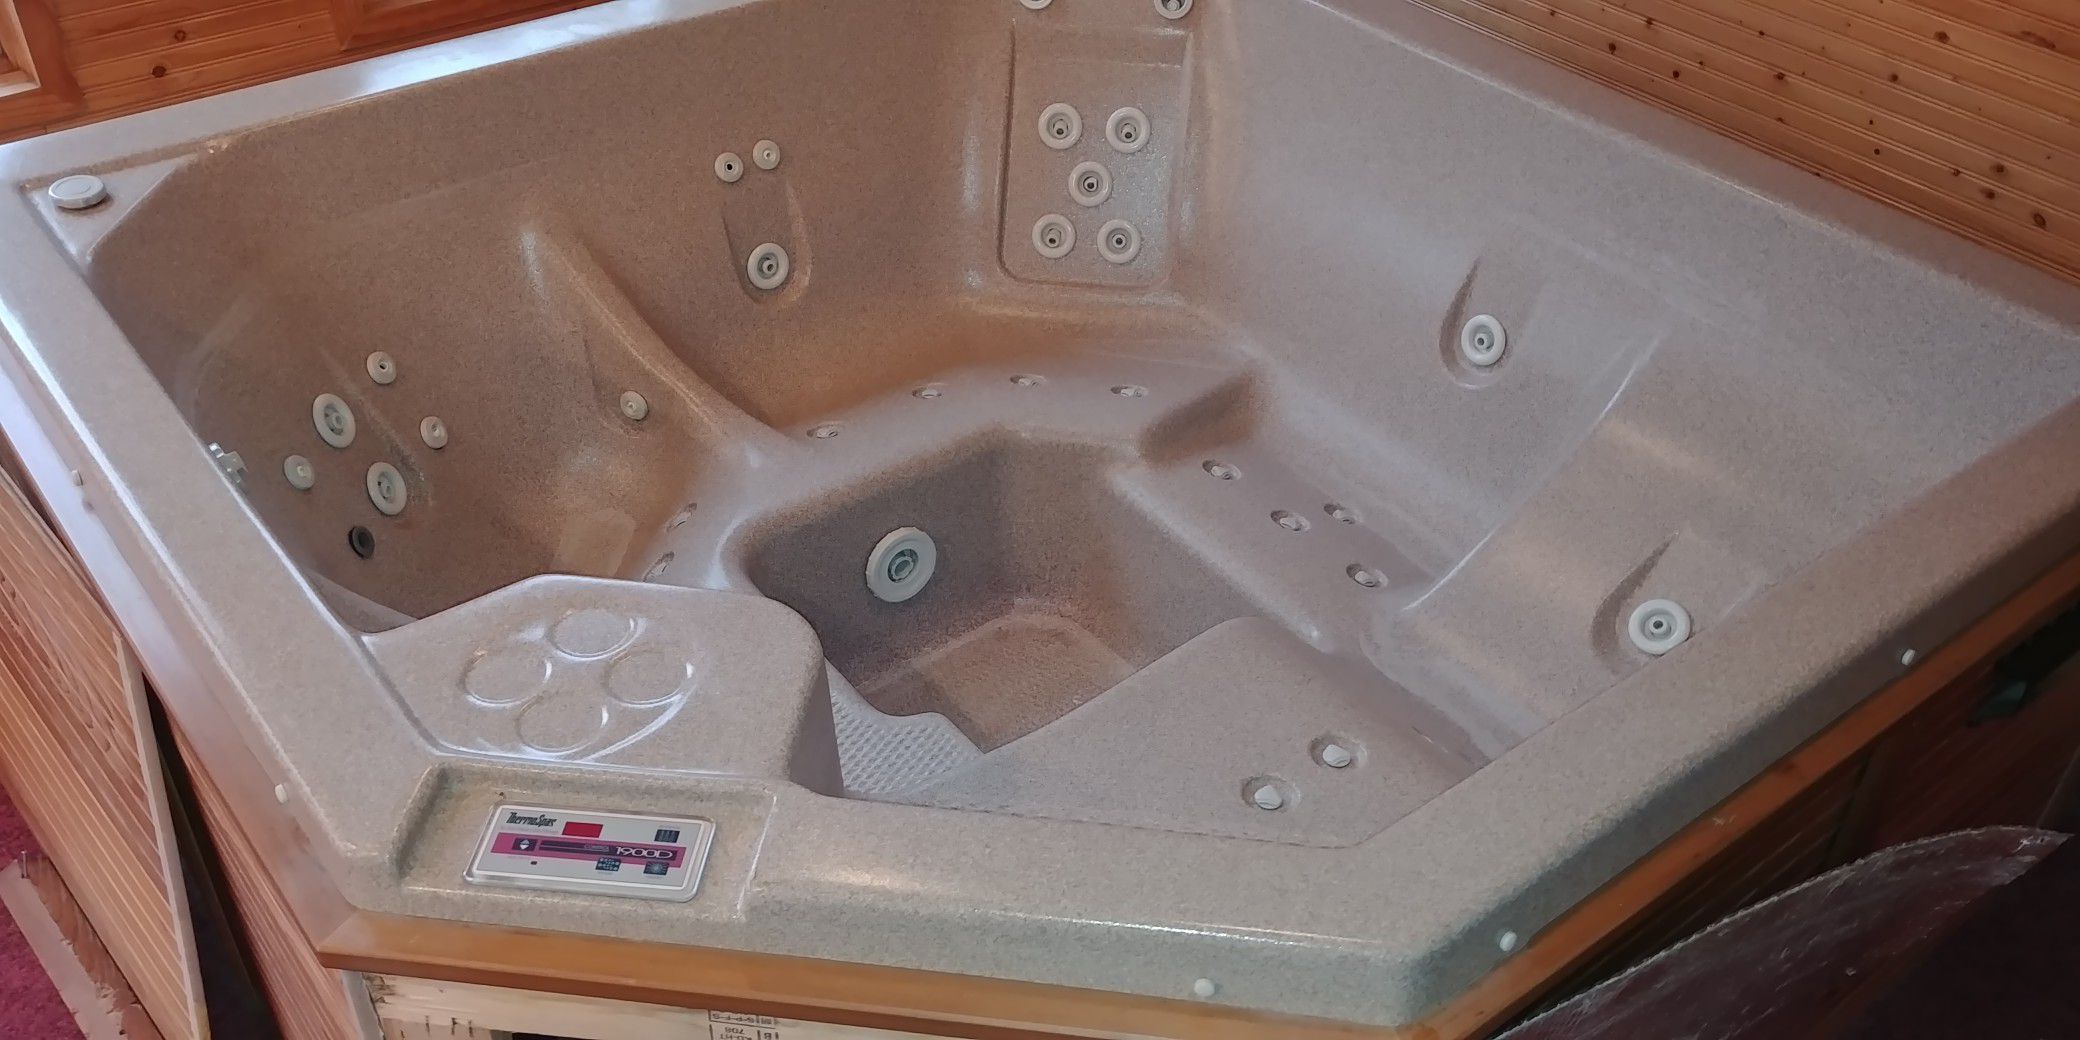 Thermospa 1900d hot tub for Sale in Bristol, WI - OfferUp